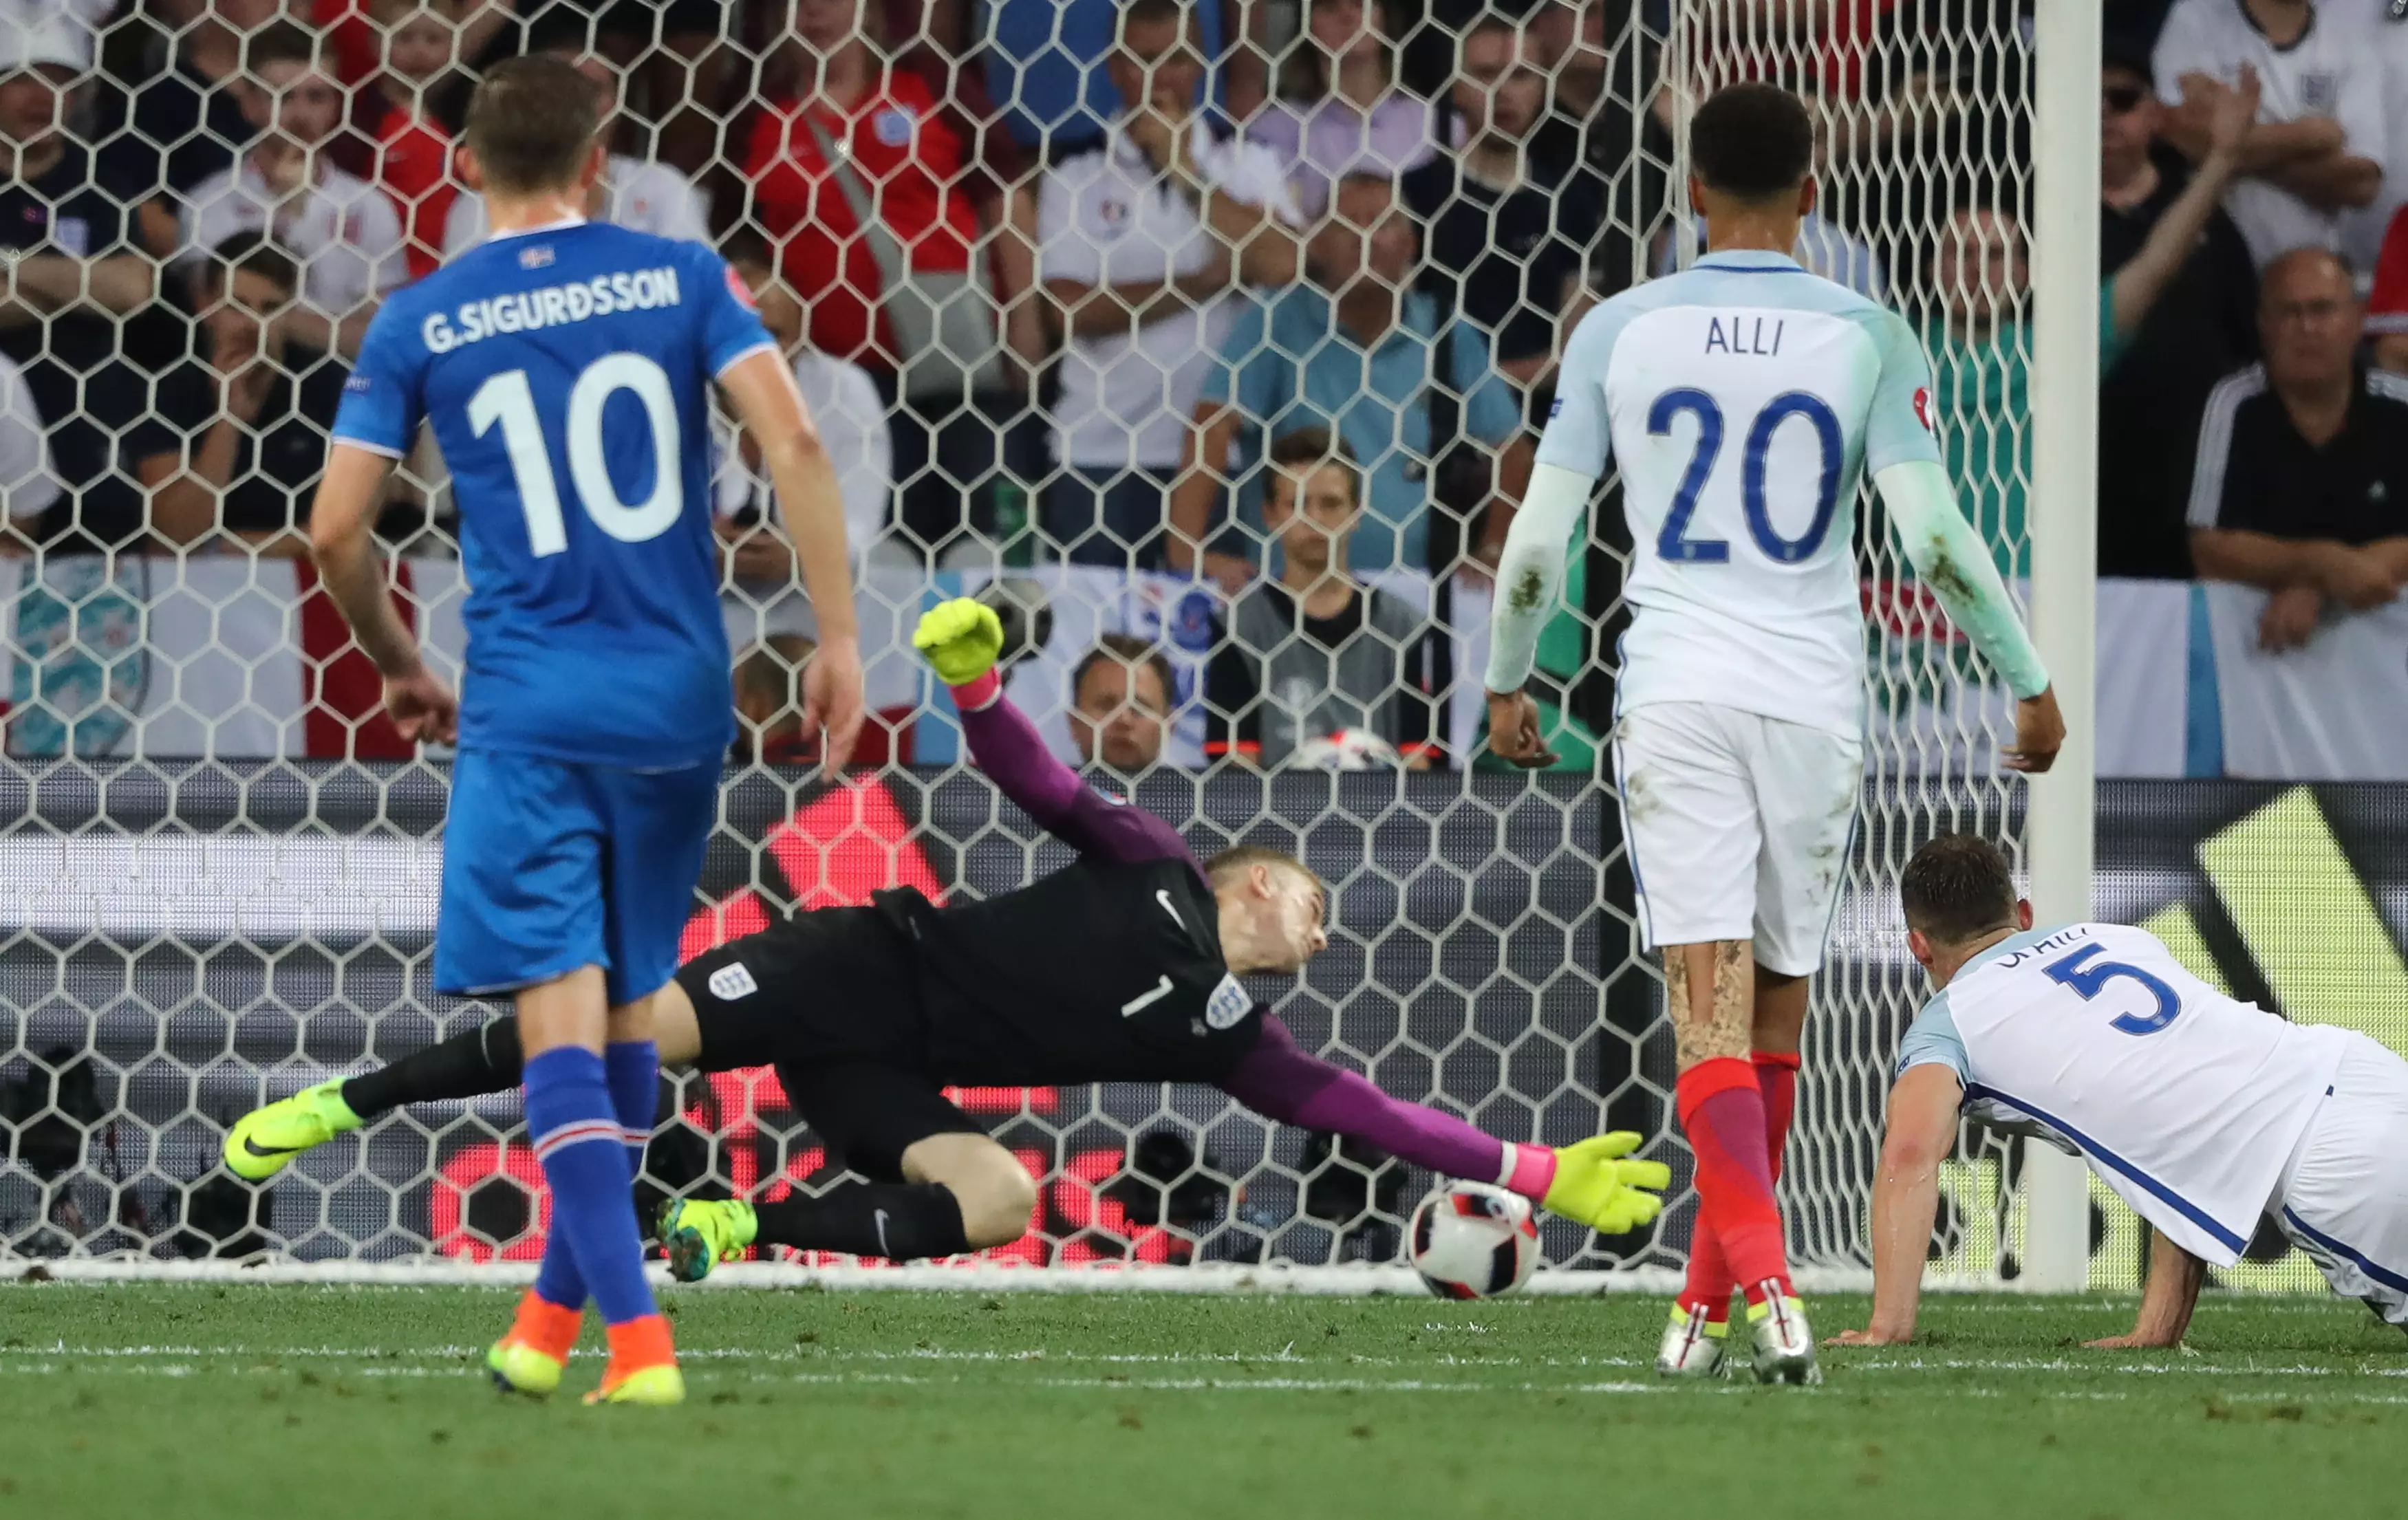 Hart's performance against Iceland was widely criticised. Image: PA Images